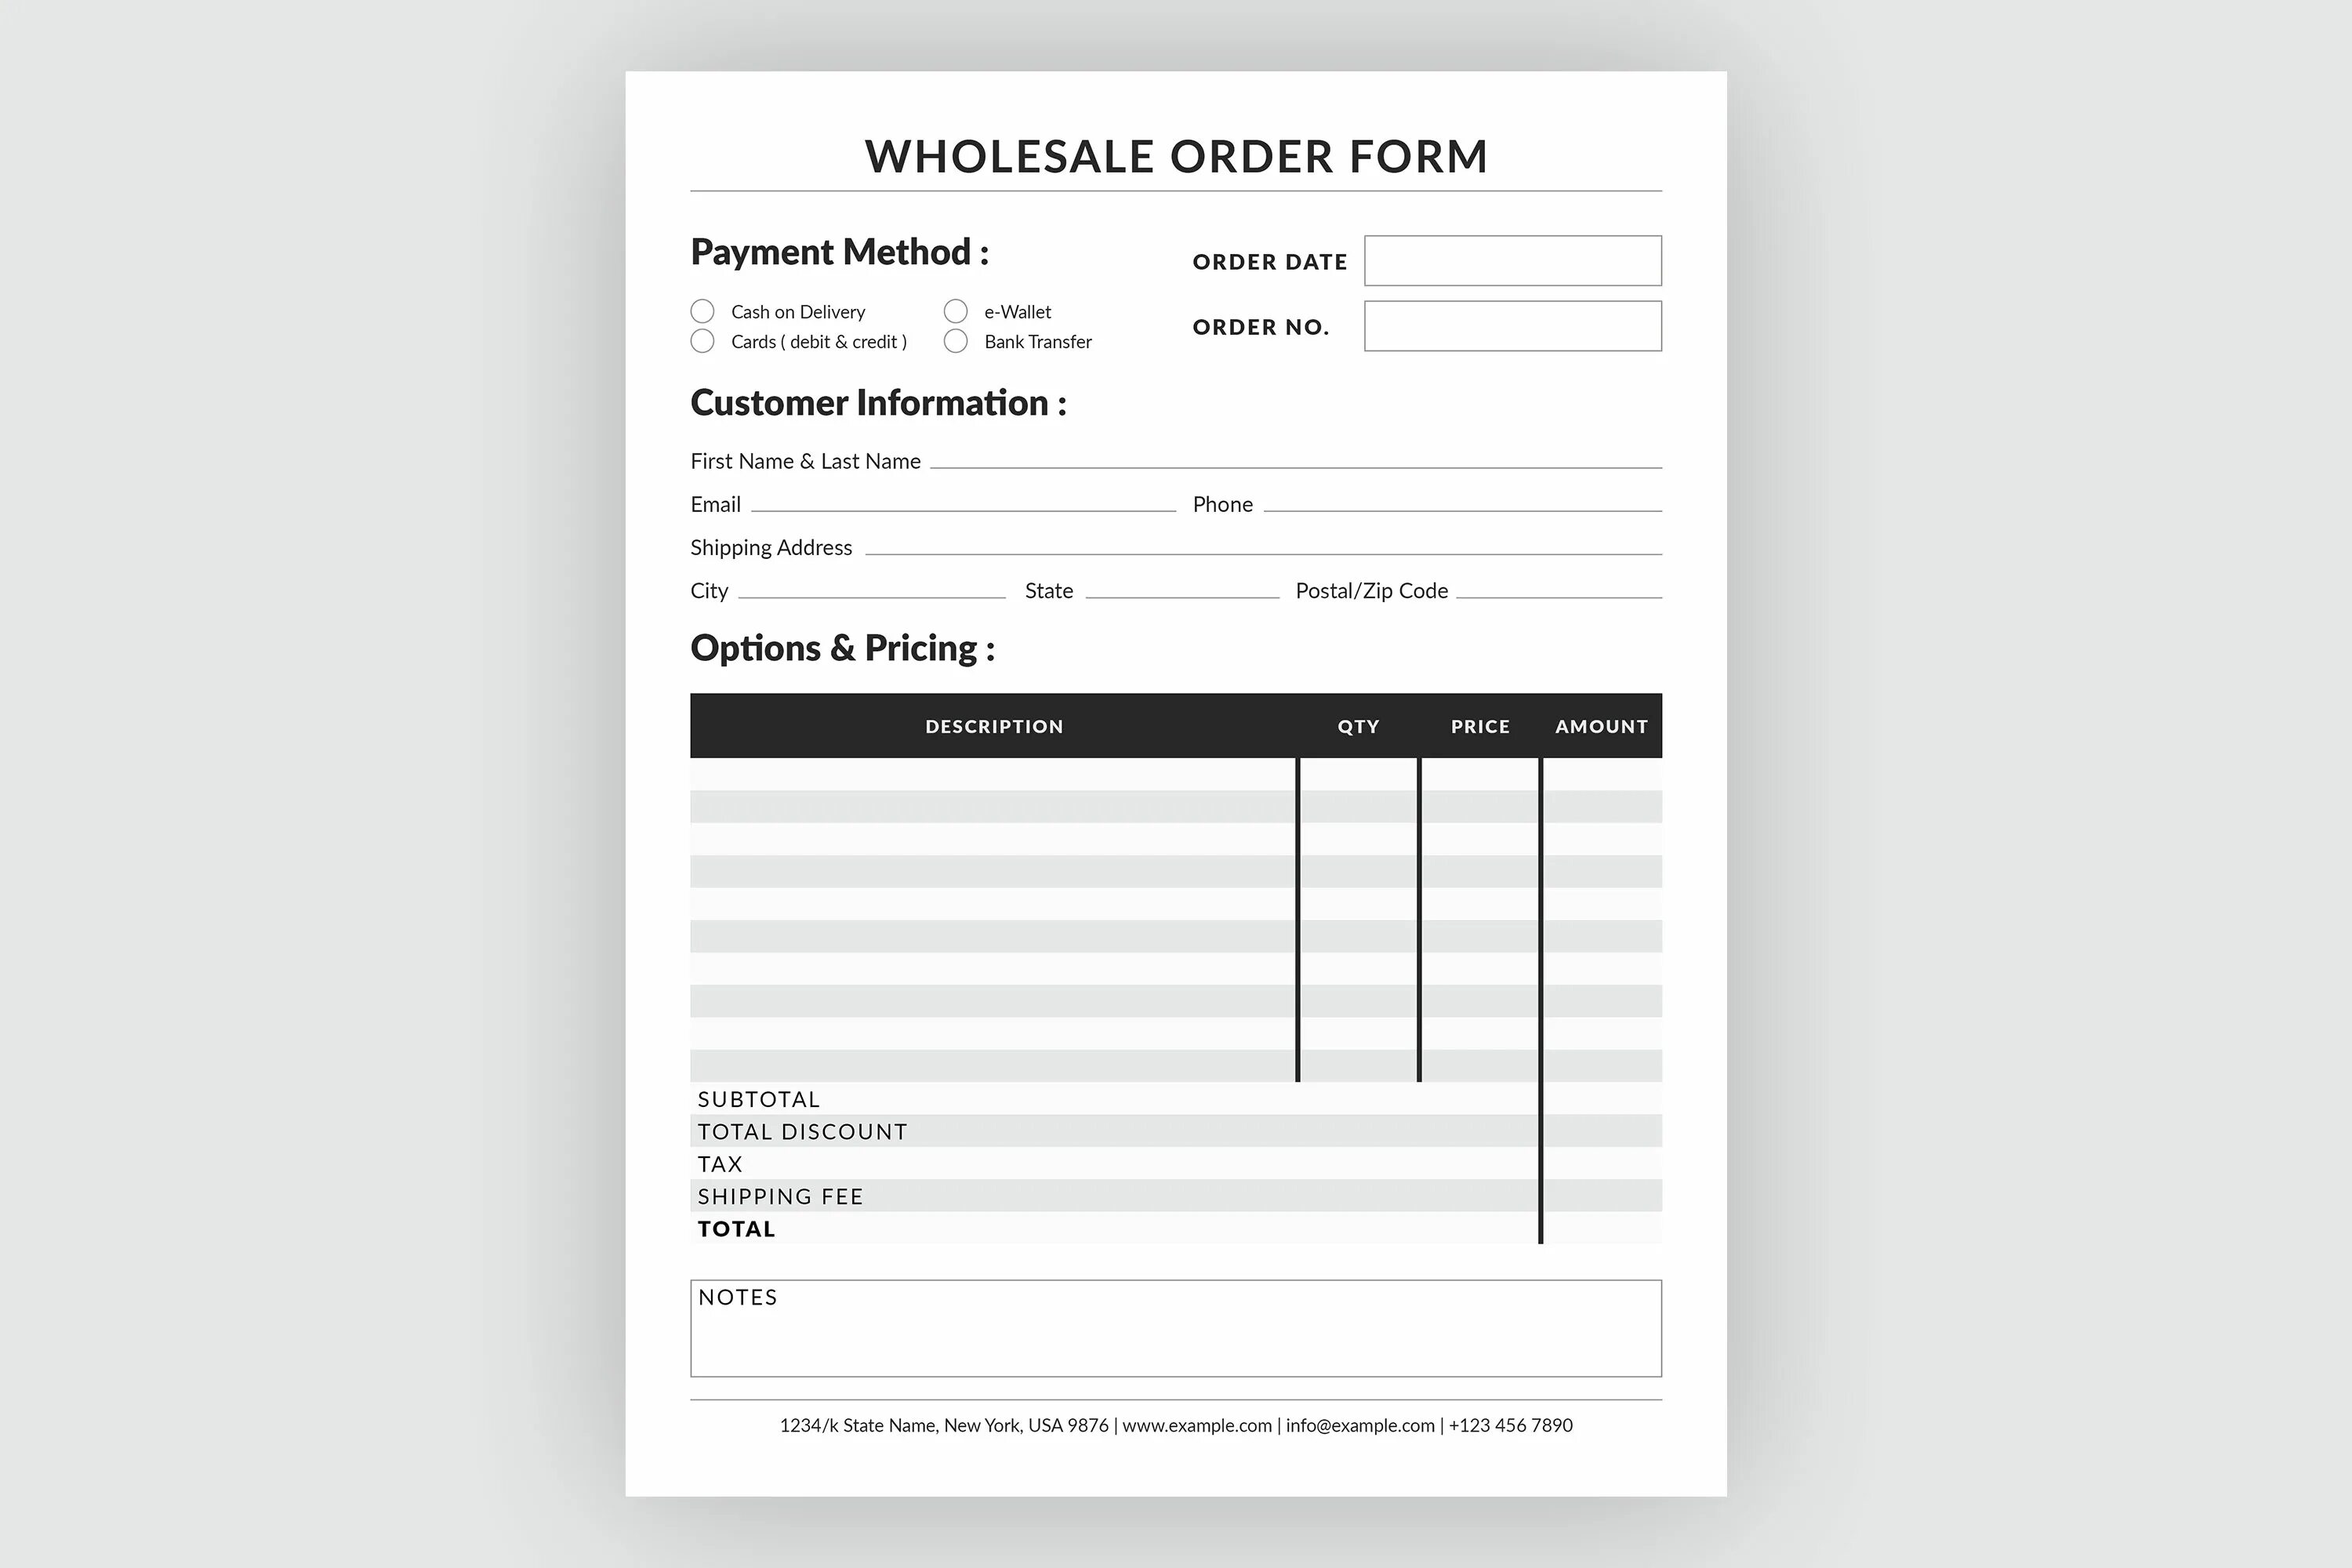 Download forms. Form. Product order form. Order form Template. Бланк макет.